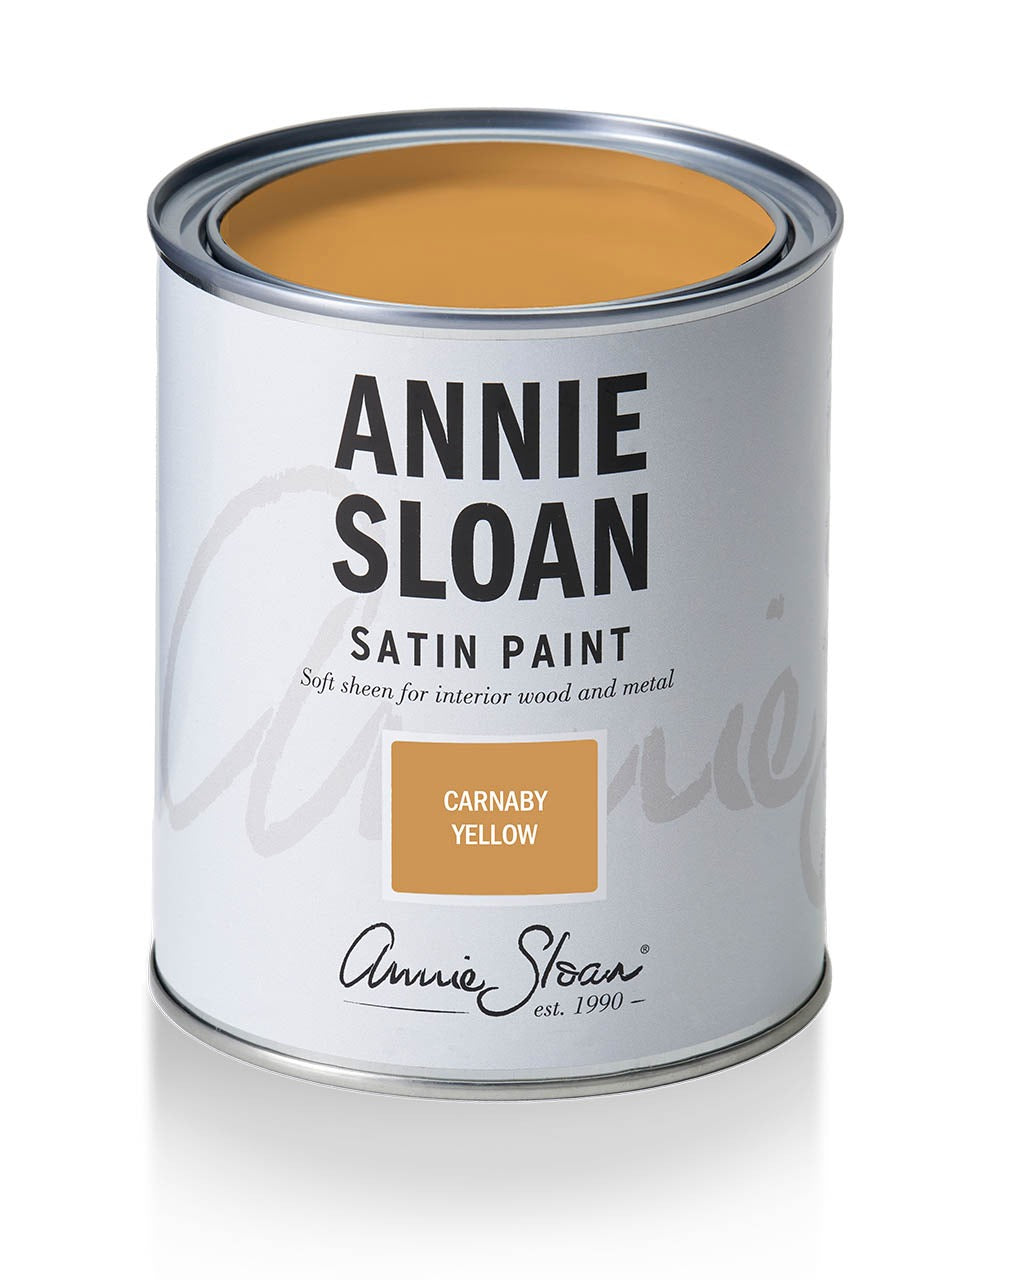 Carnaby Yellow Satin Paint by Annie Sloan